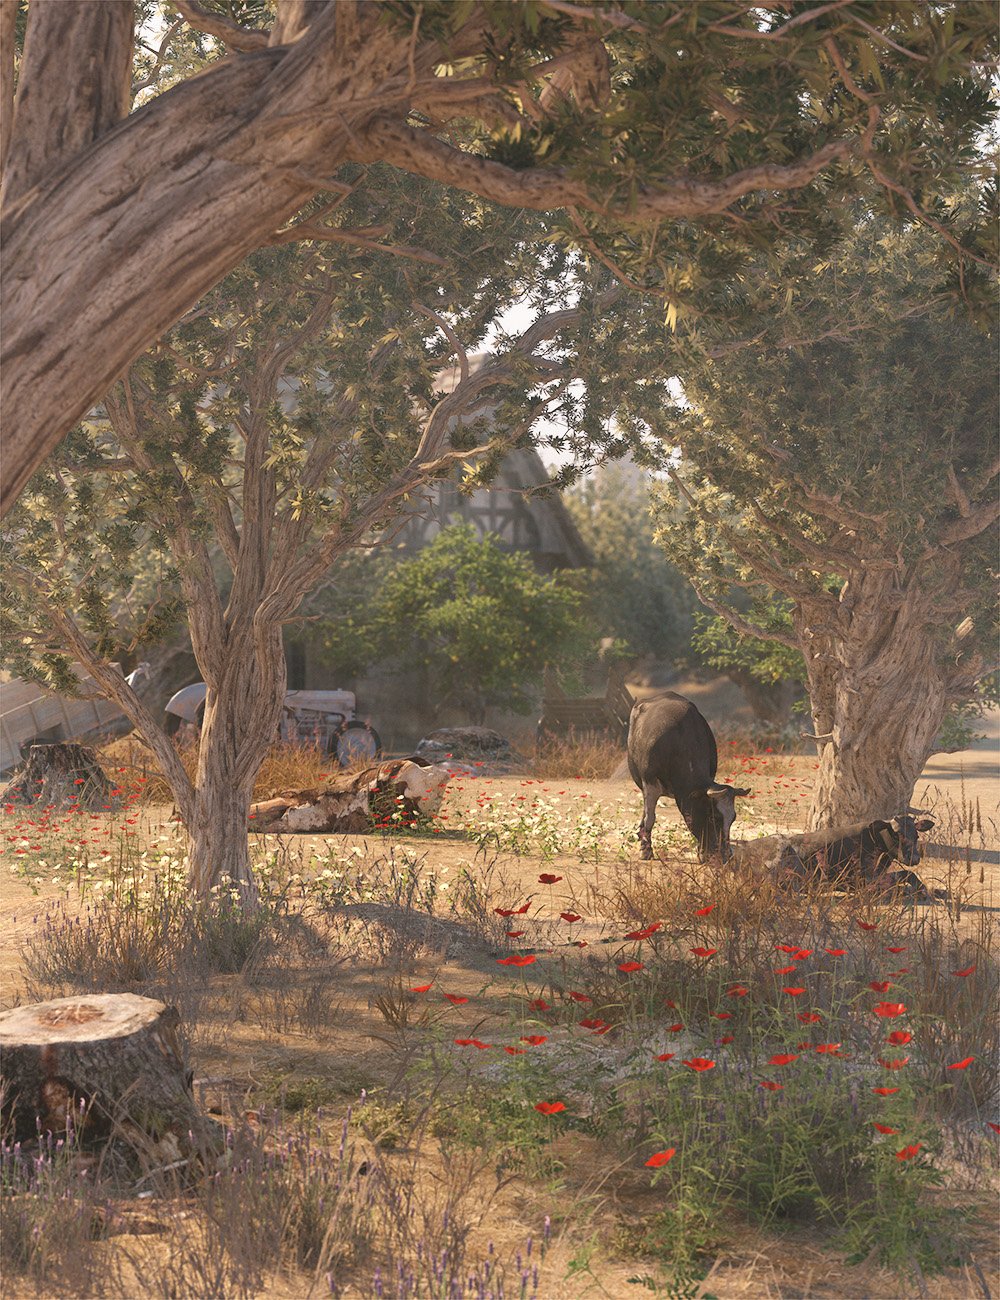 Olive Grove - Ancient Olive Trees by: MartinJFrost, 3D Models by Daz 3D